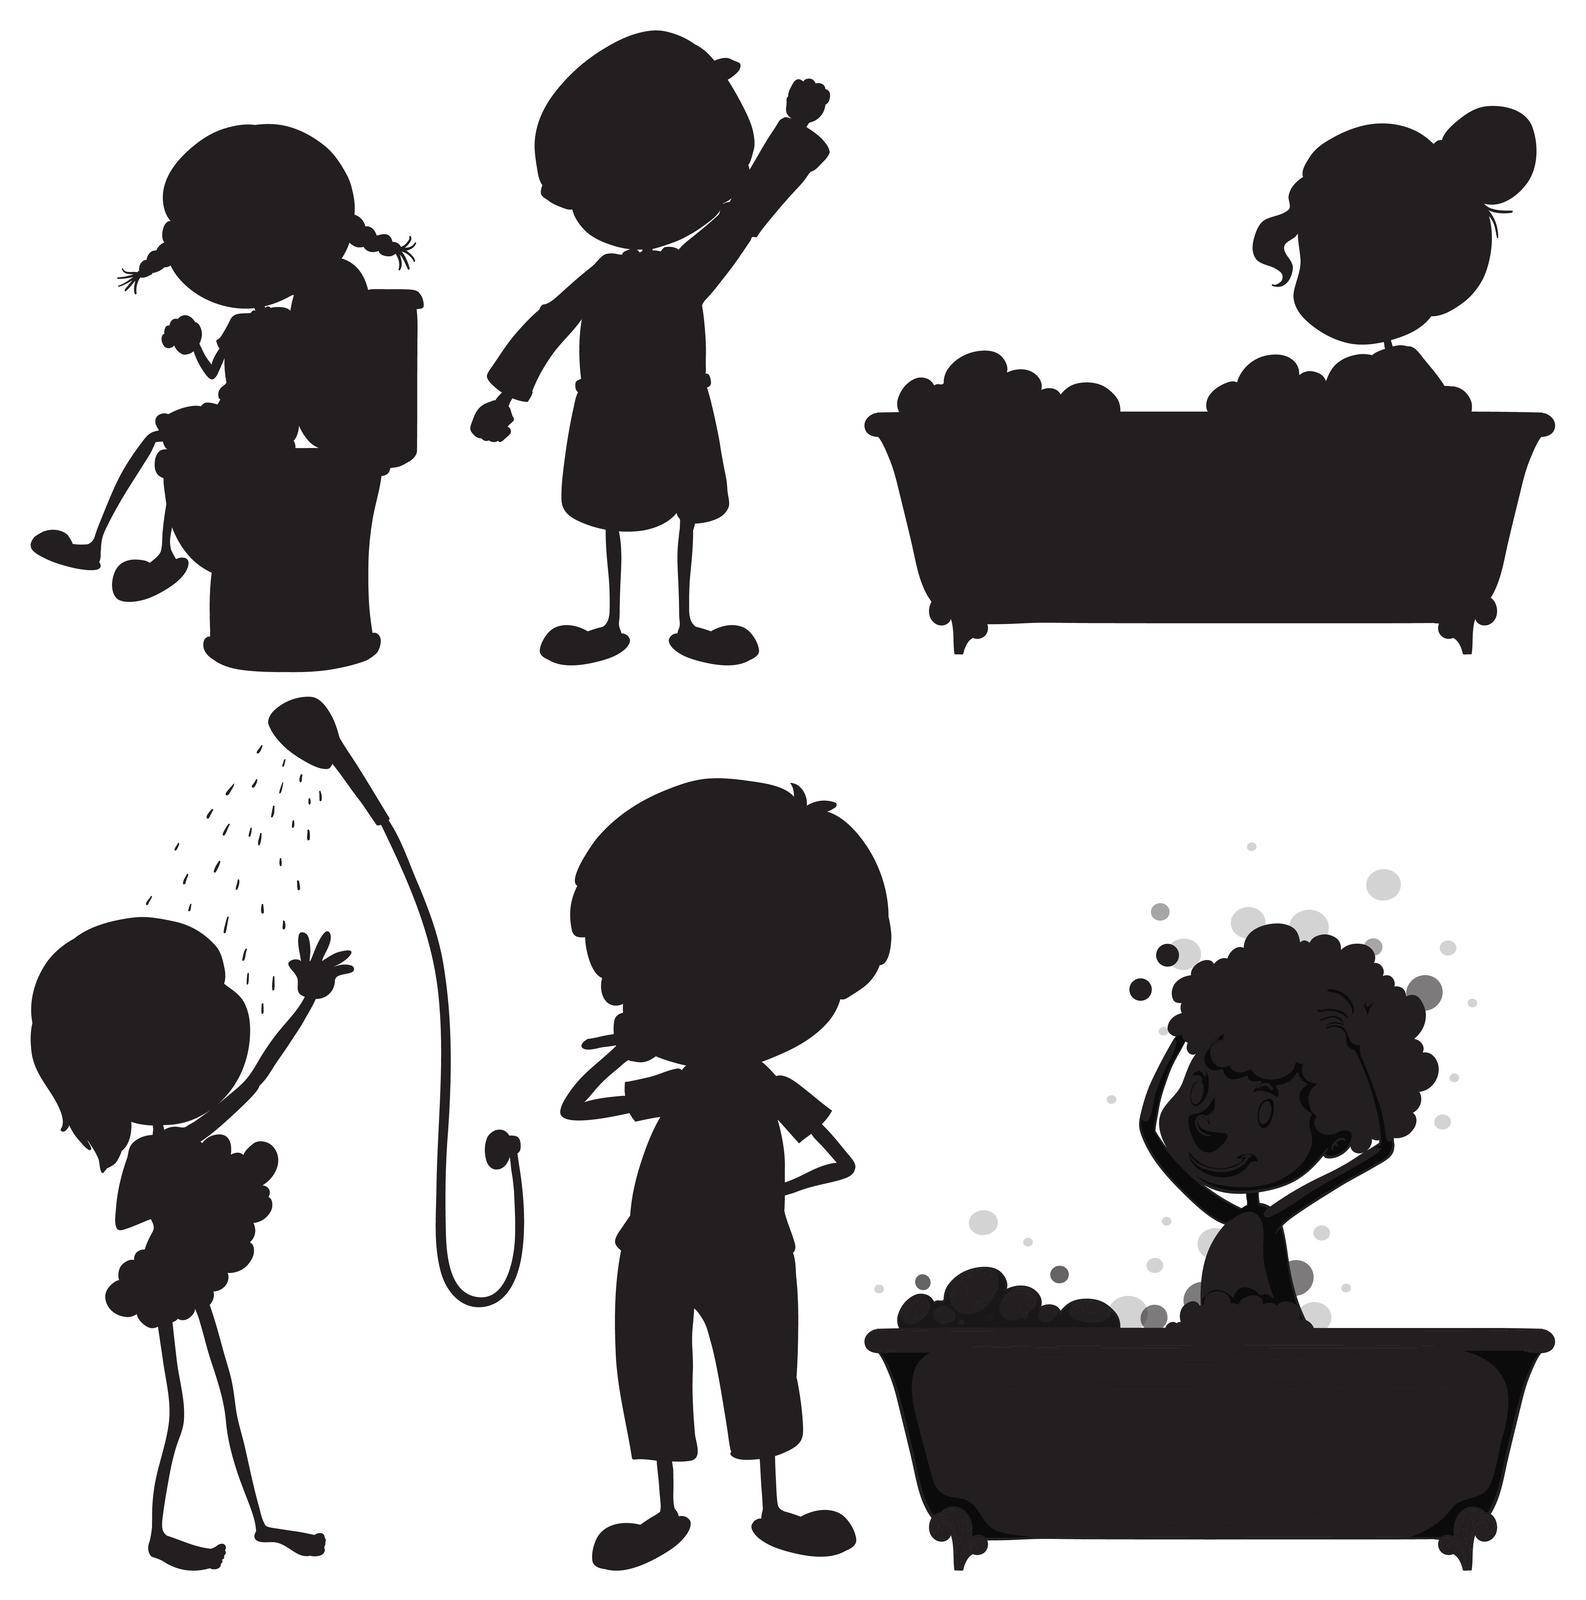 Illustration of the black sketches of the different morning routines on a white background